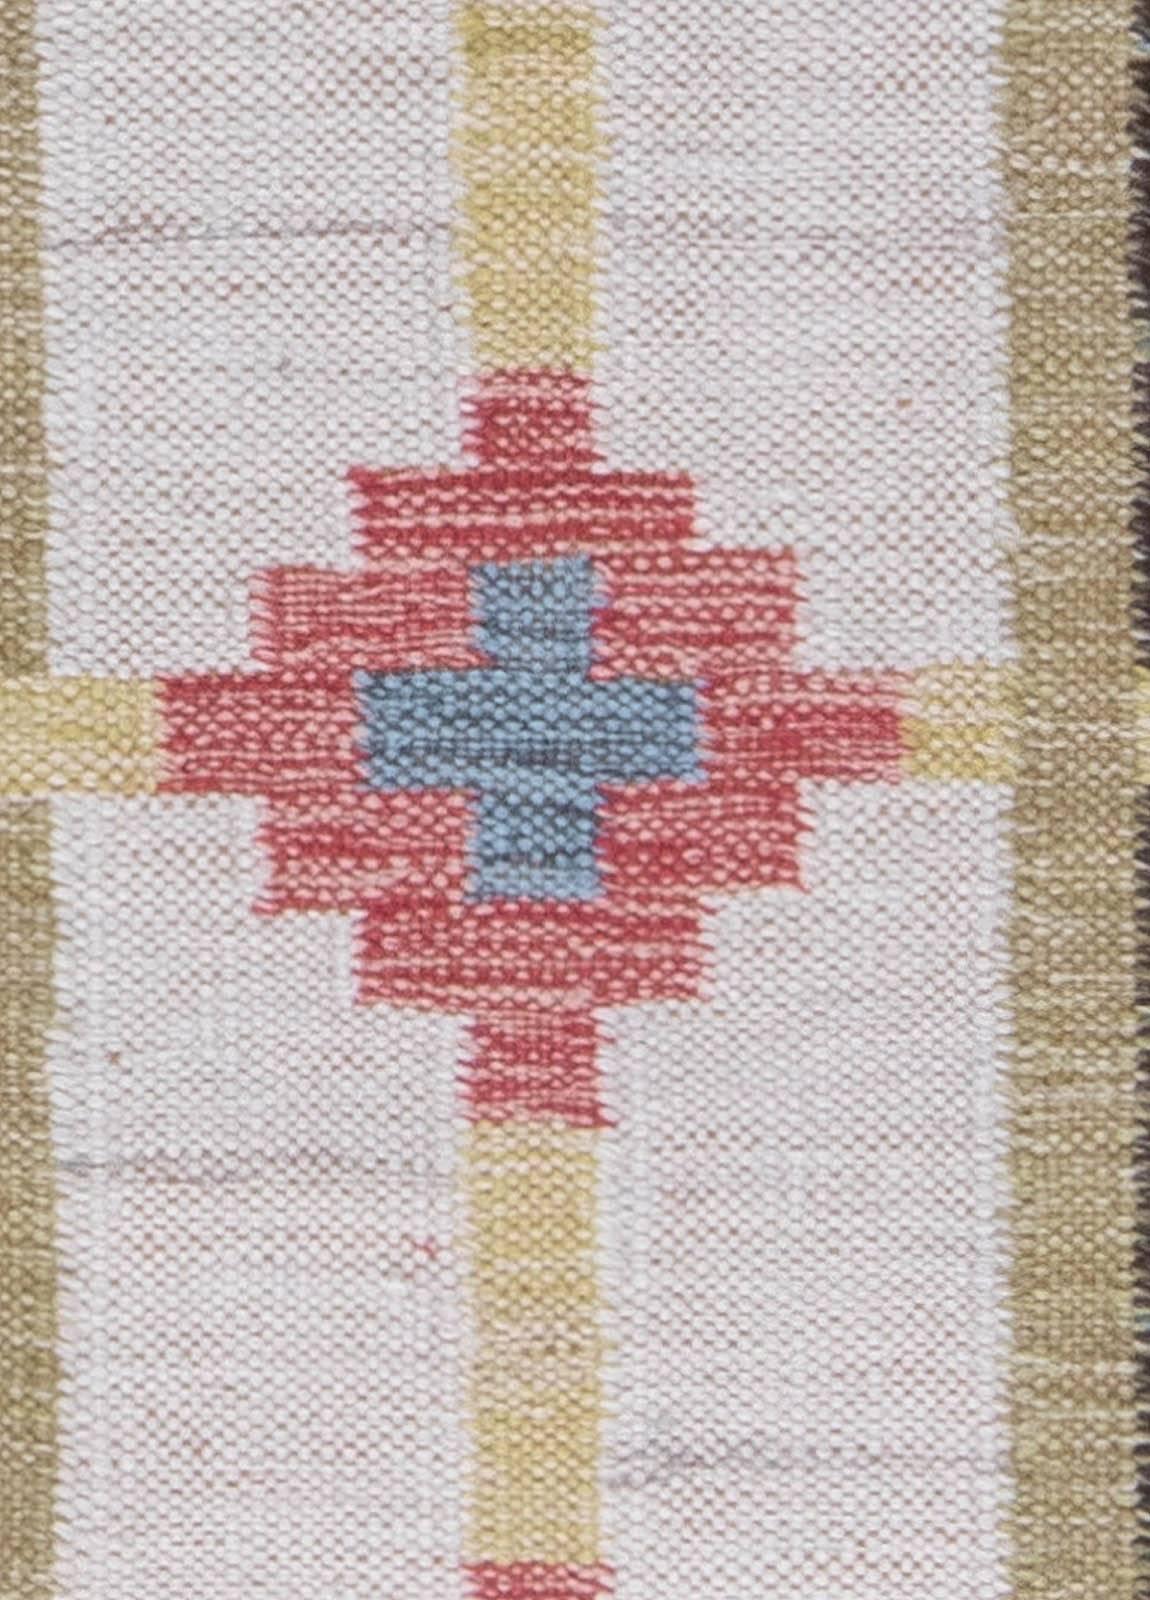 Mid-20th Century Swedish pink, blue and yellow flat-weave runner by Sverker Greuholm.
Size: 3'4